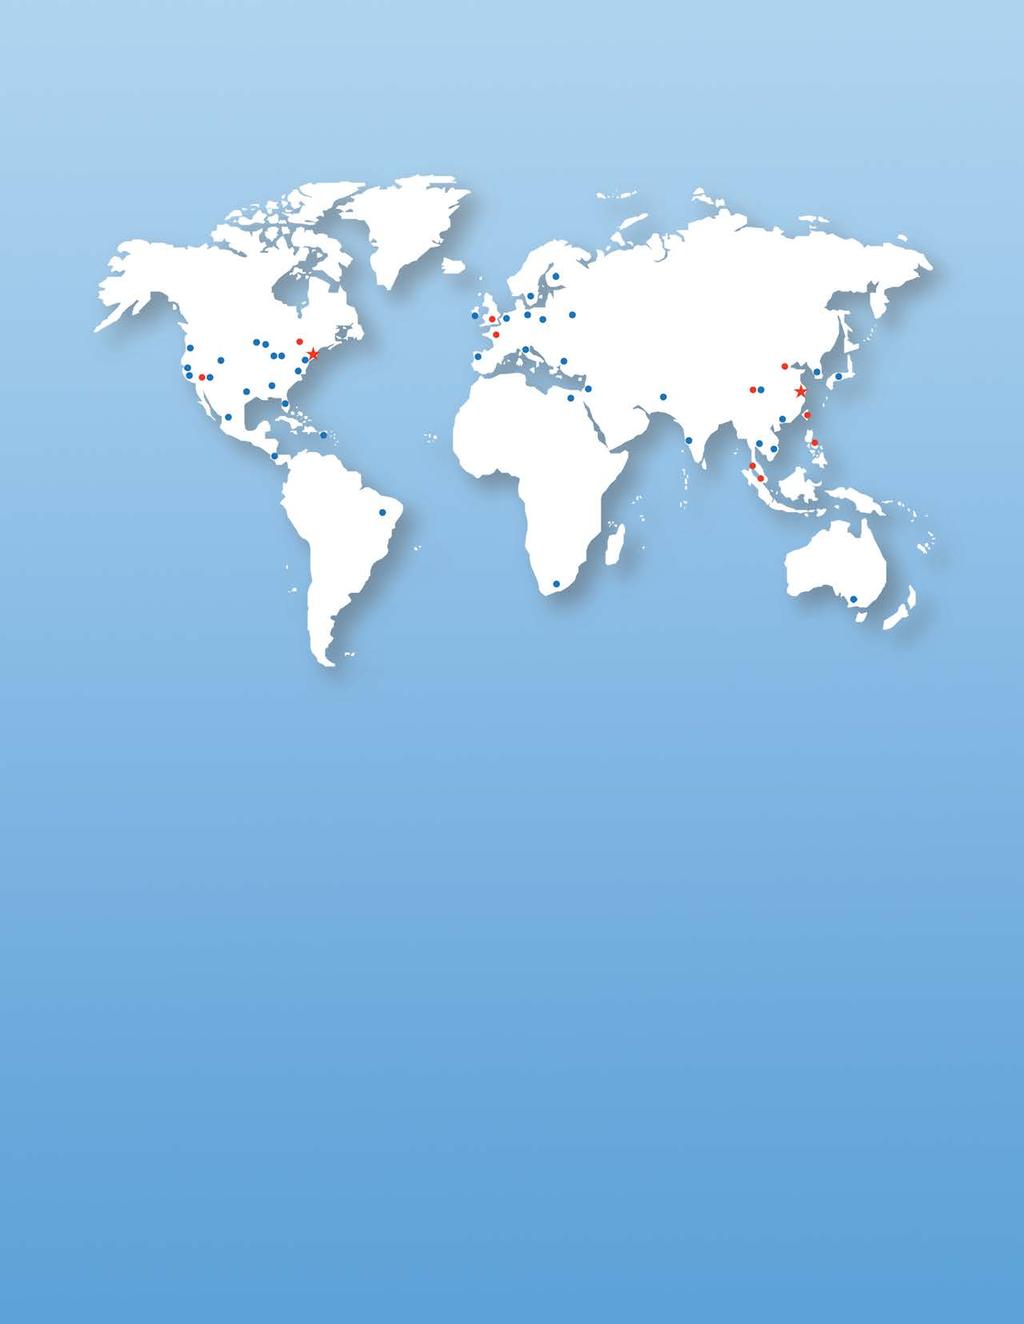 Global Strength BTU provides world-class service and customer support in over 30 countries around the globe.